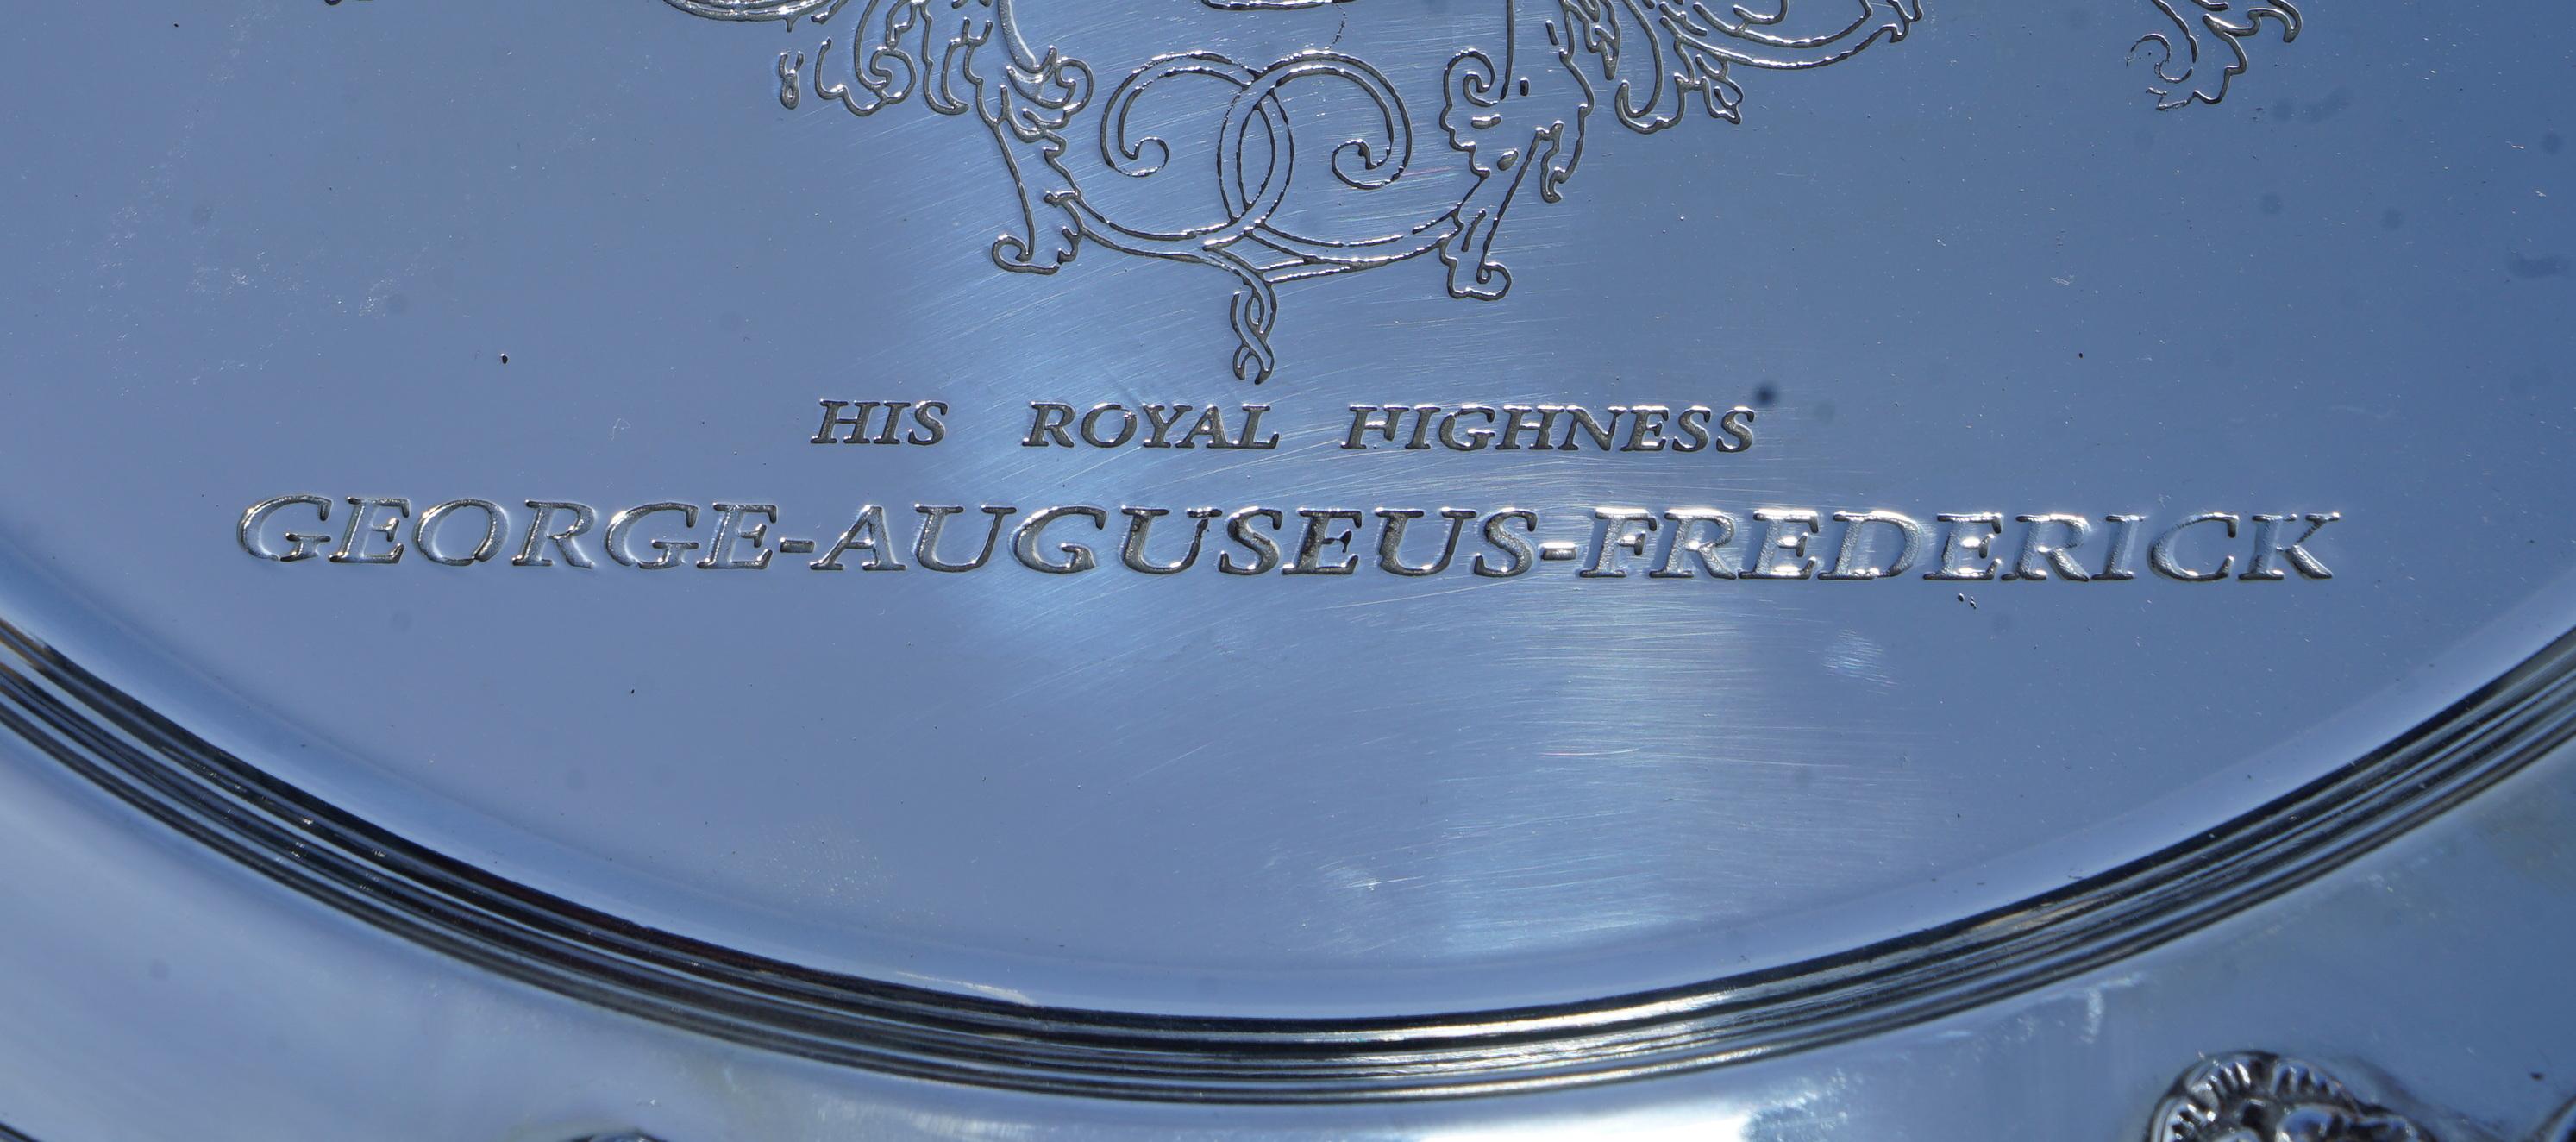 1 of 19 King George Auguseue Frederick Arms Sterling Silver Plated 1919 Trays For Sale 4